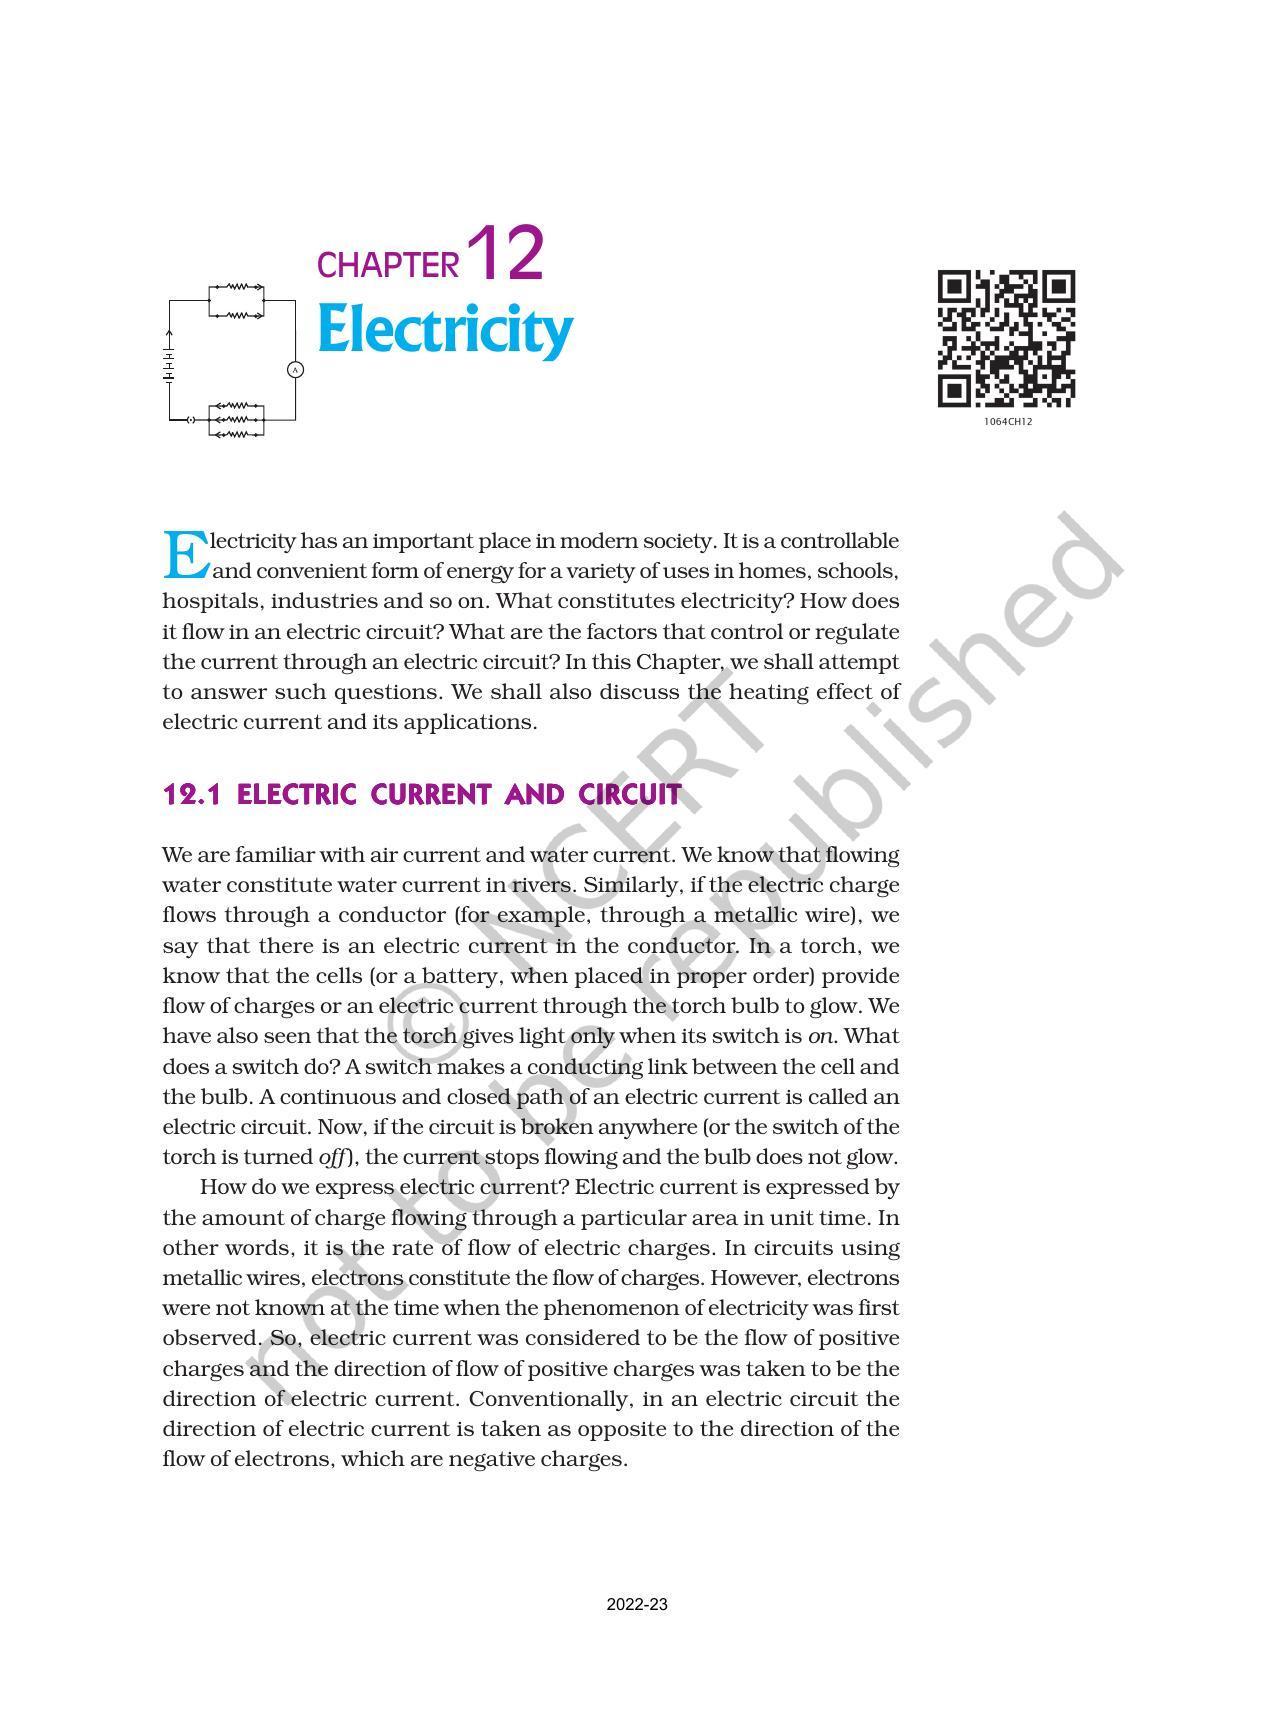 NCERT Book for Class 10 Science Chapter 12 Electricity - Page 1